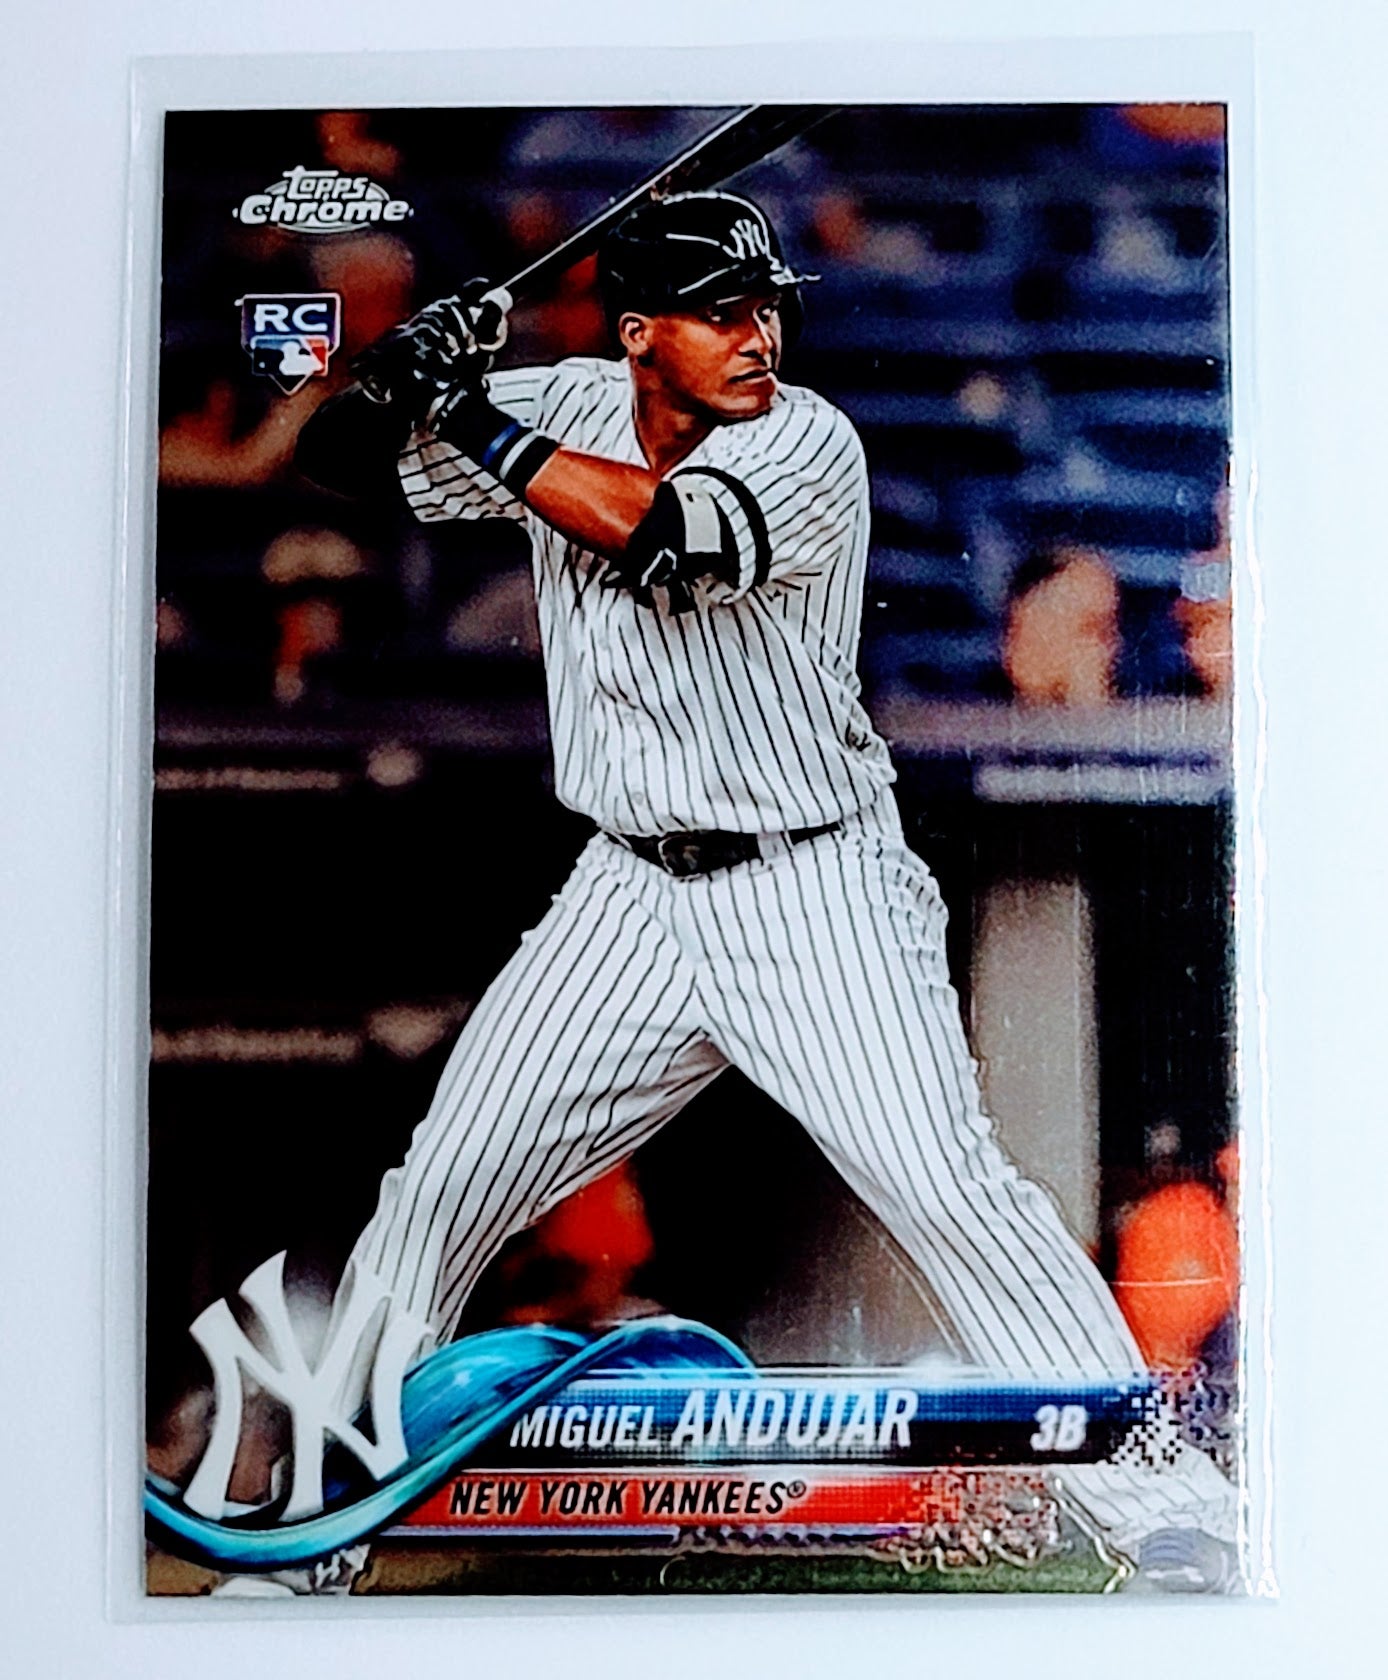 2018 Topps Chrome Miguel
  Andujar   RC Baseball Card  TH13C simple Xclusive Collectibles   